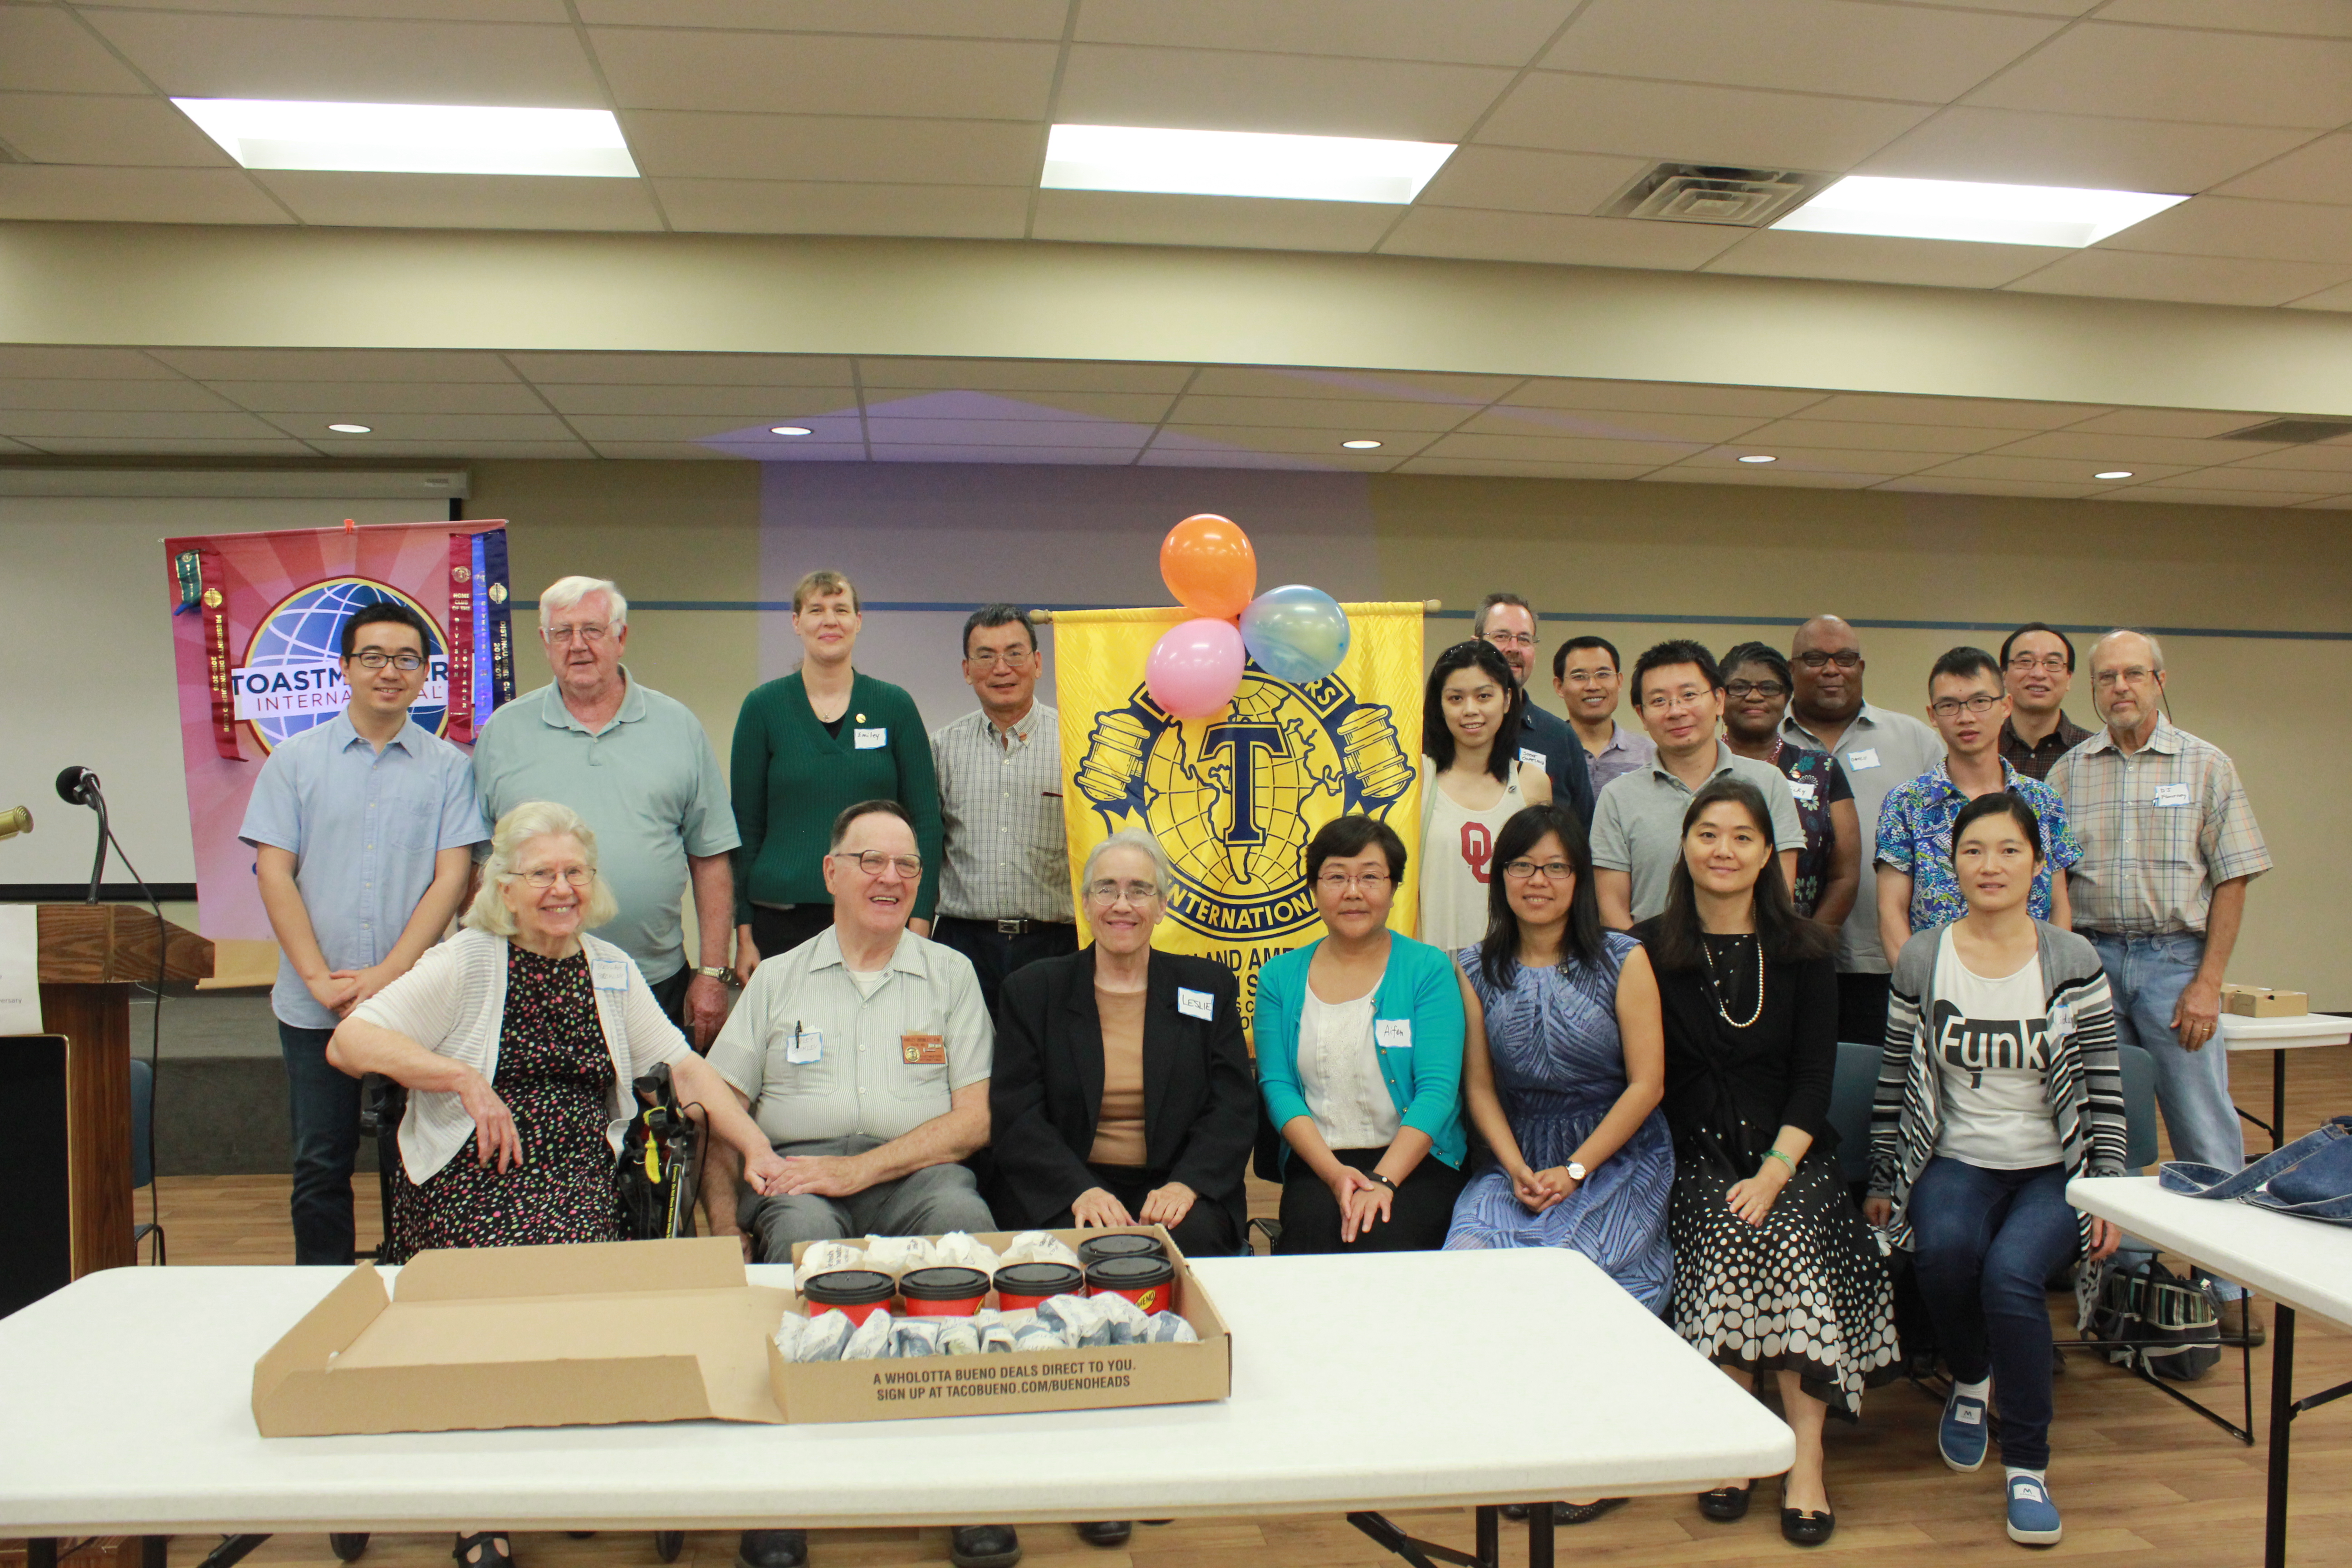 13th Aniversary Celebration at Norman Public Library on June 17th, 2017